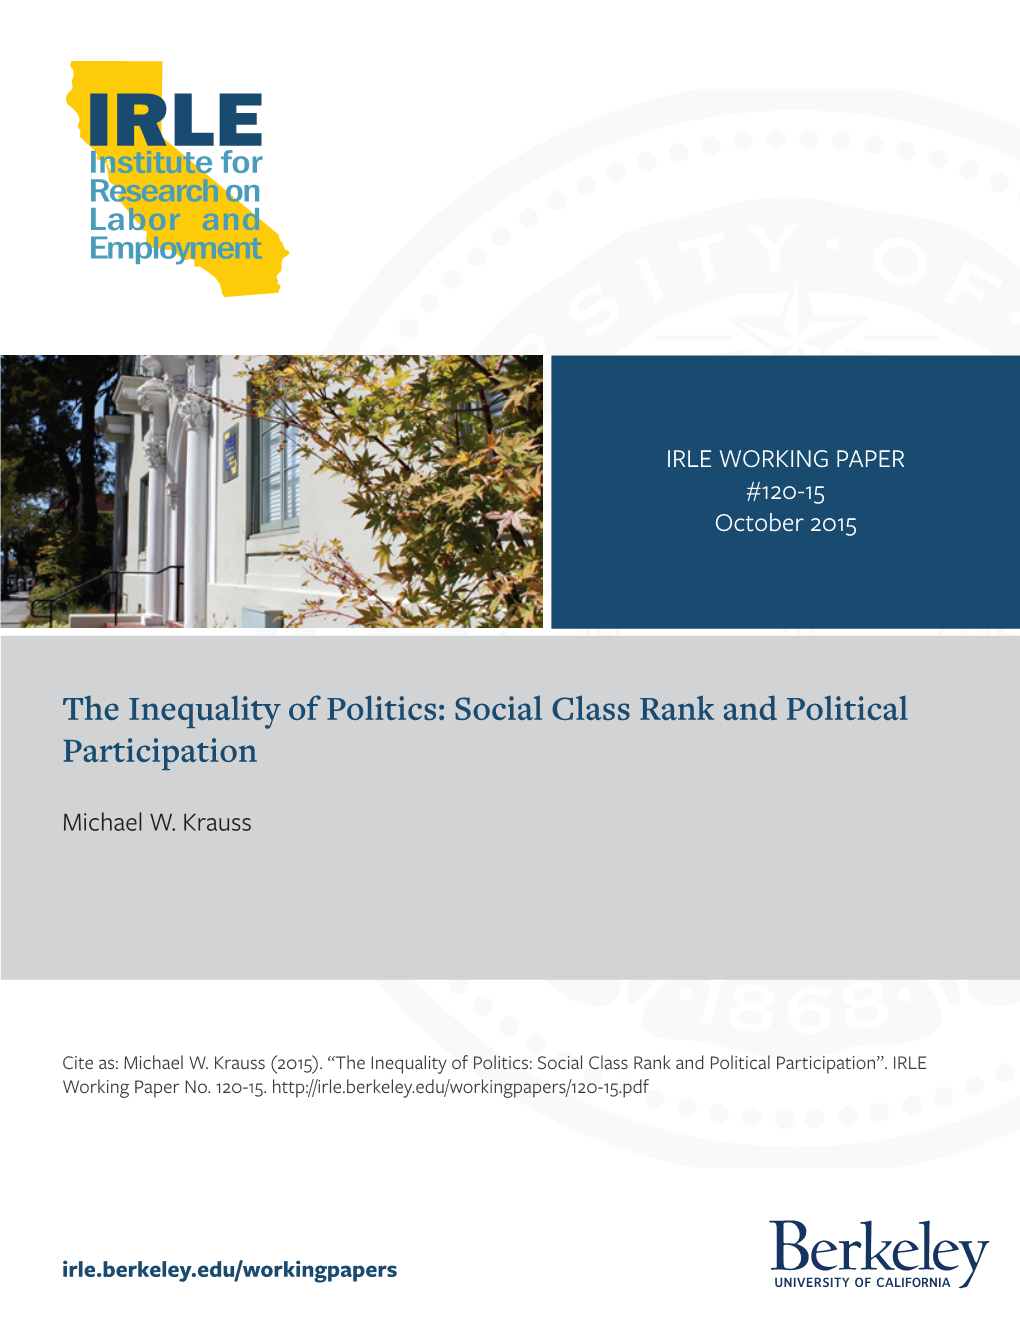 The Inequality of Politics: Social Class Rank and Political Participation